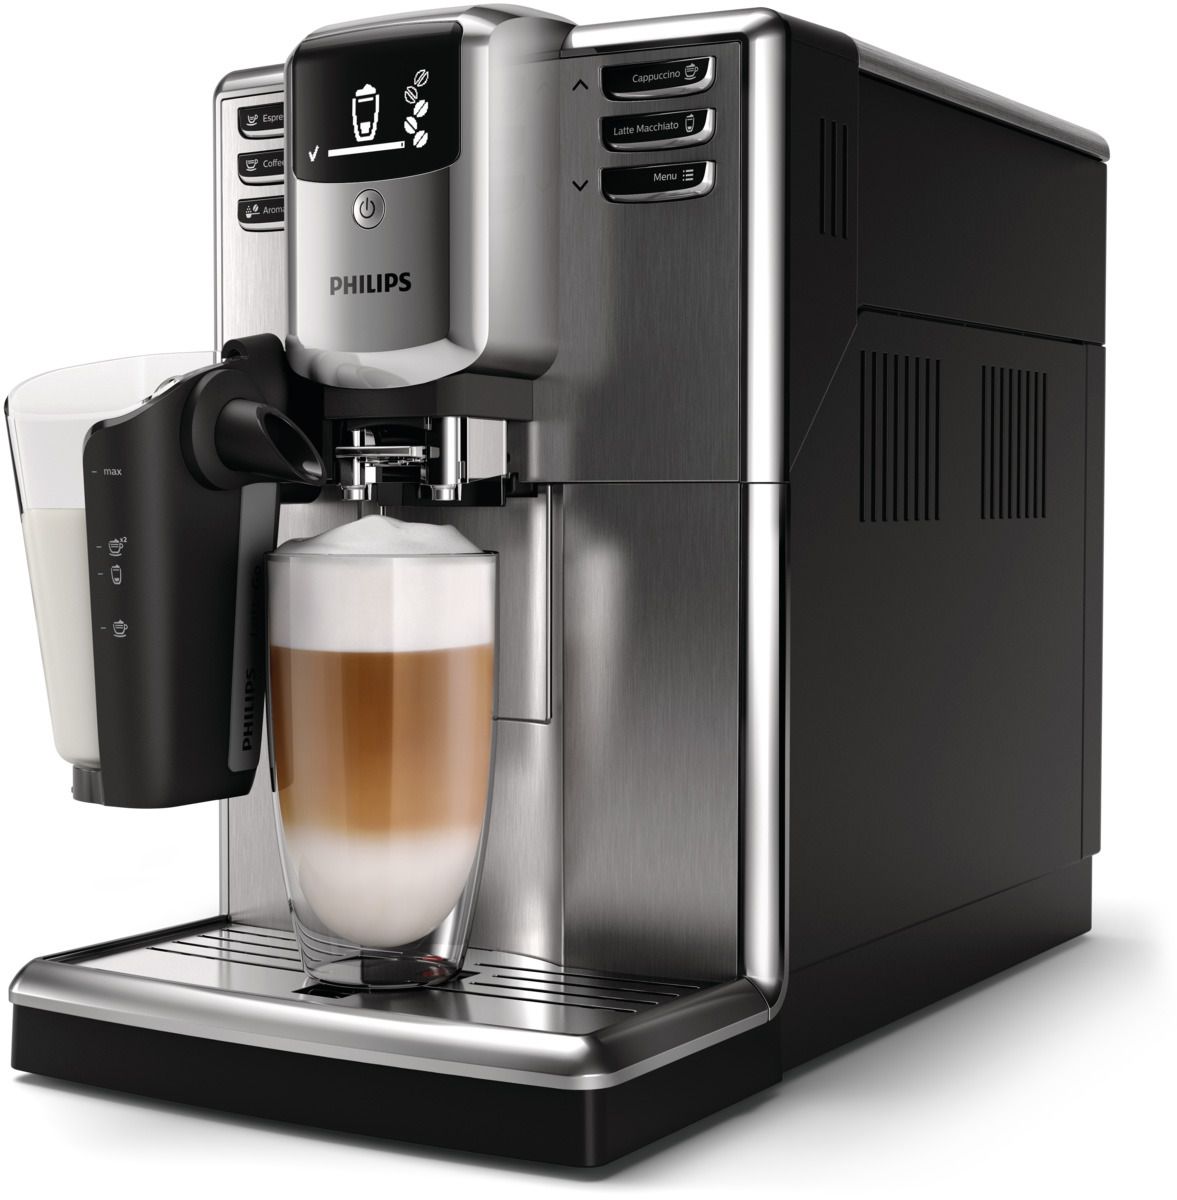  Philips Series 5000 EP5035/10 LatteGo, Silver Black